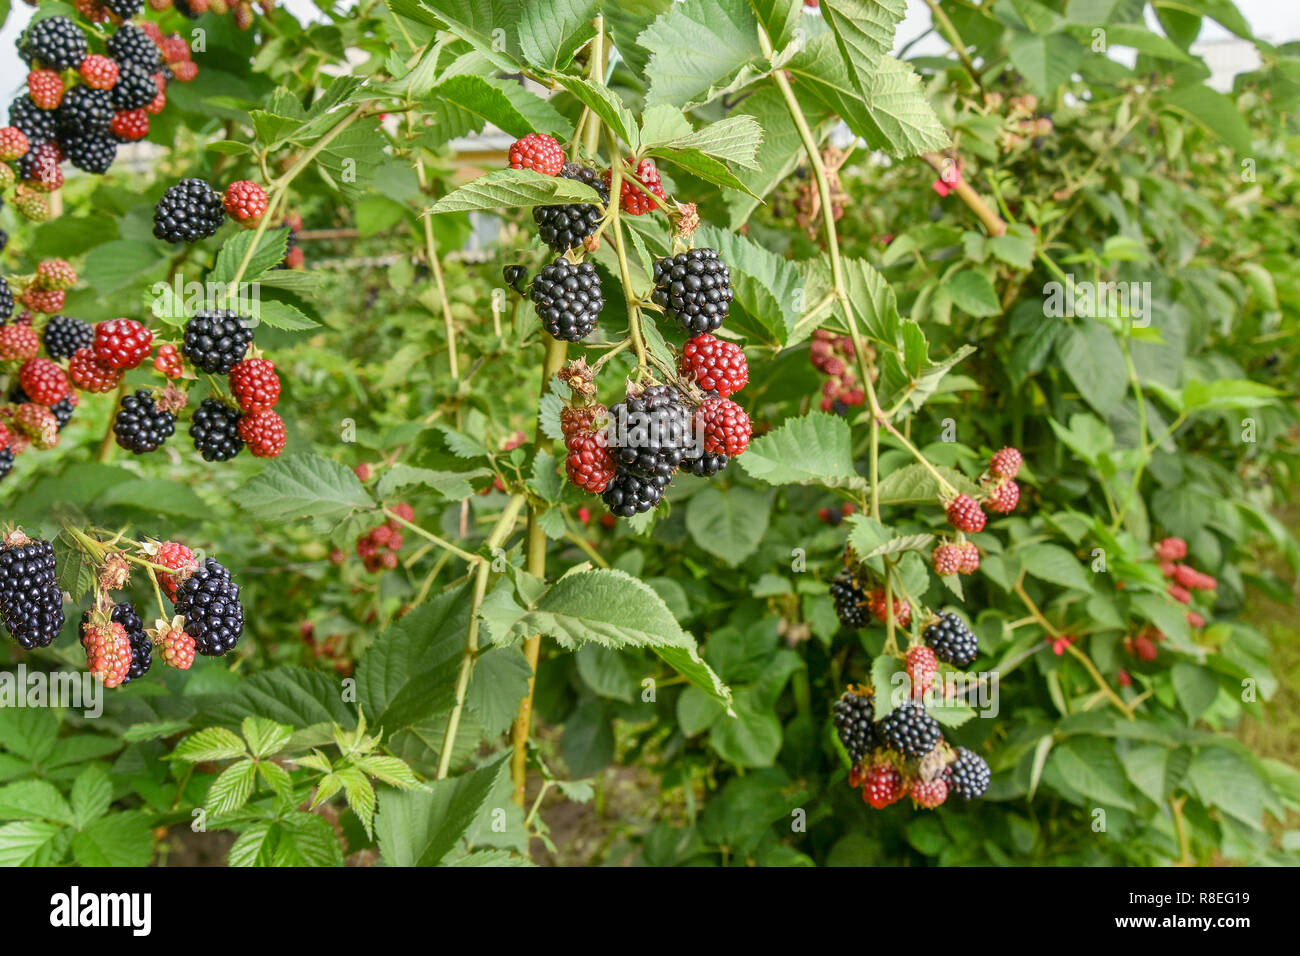 https://c8.alamy.com/comp/R8EG19/bramble-berry-bush-with-black-ripe-berries-closeup-the-concept-of-harvesting-berries-in-the-countryside-toning-R8EG19.jpg